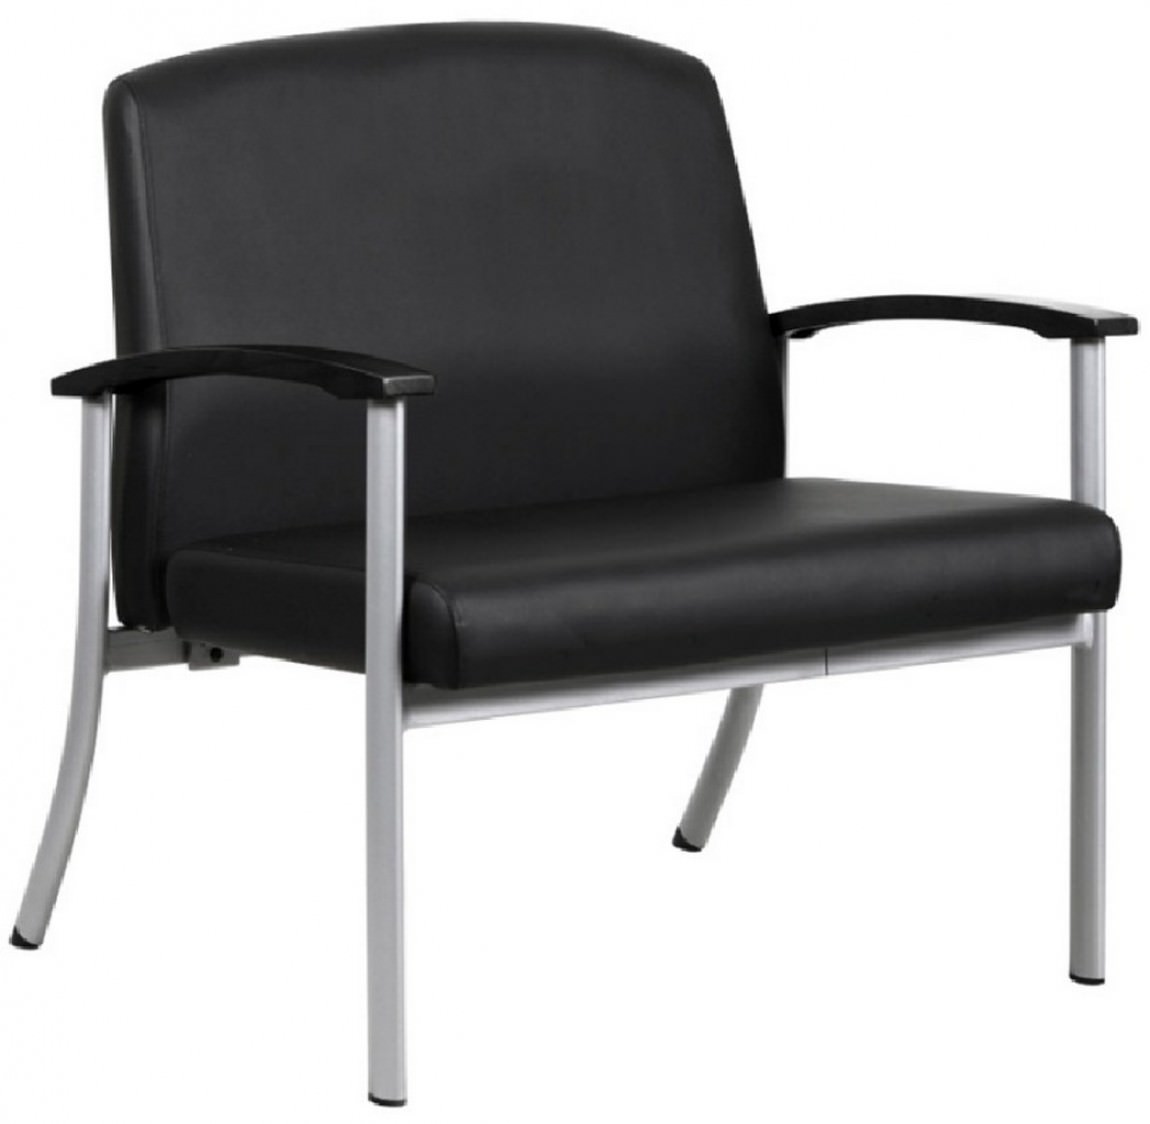 6356 Extra Wide Heavy Duty Guest Chair 1 